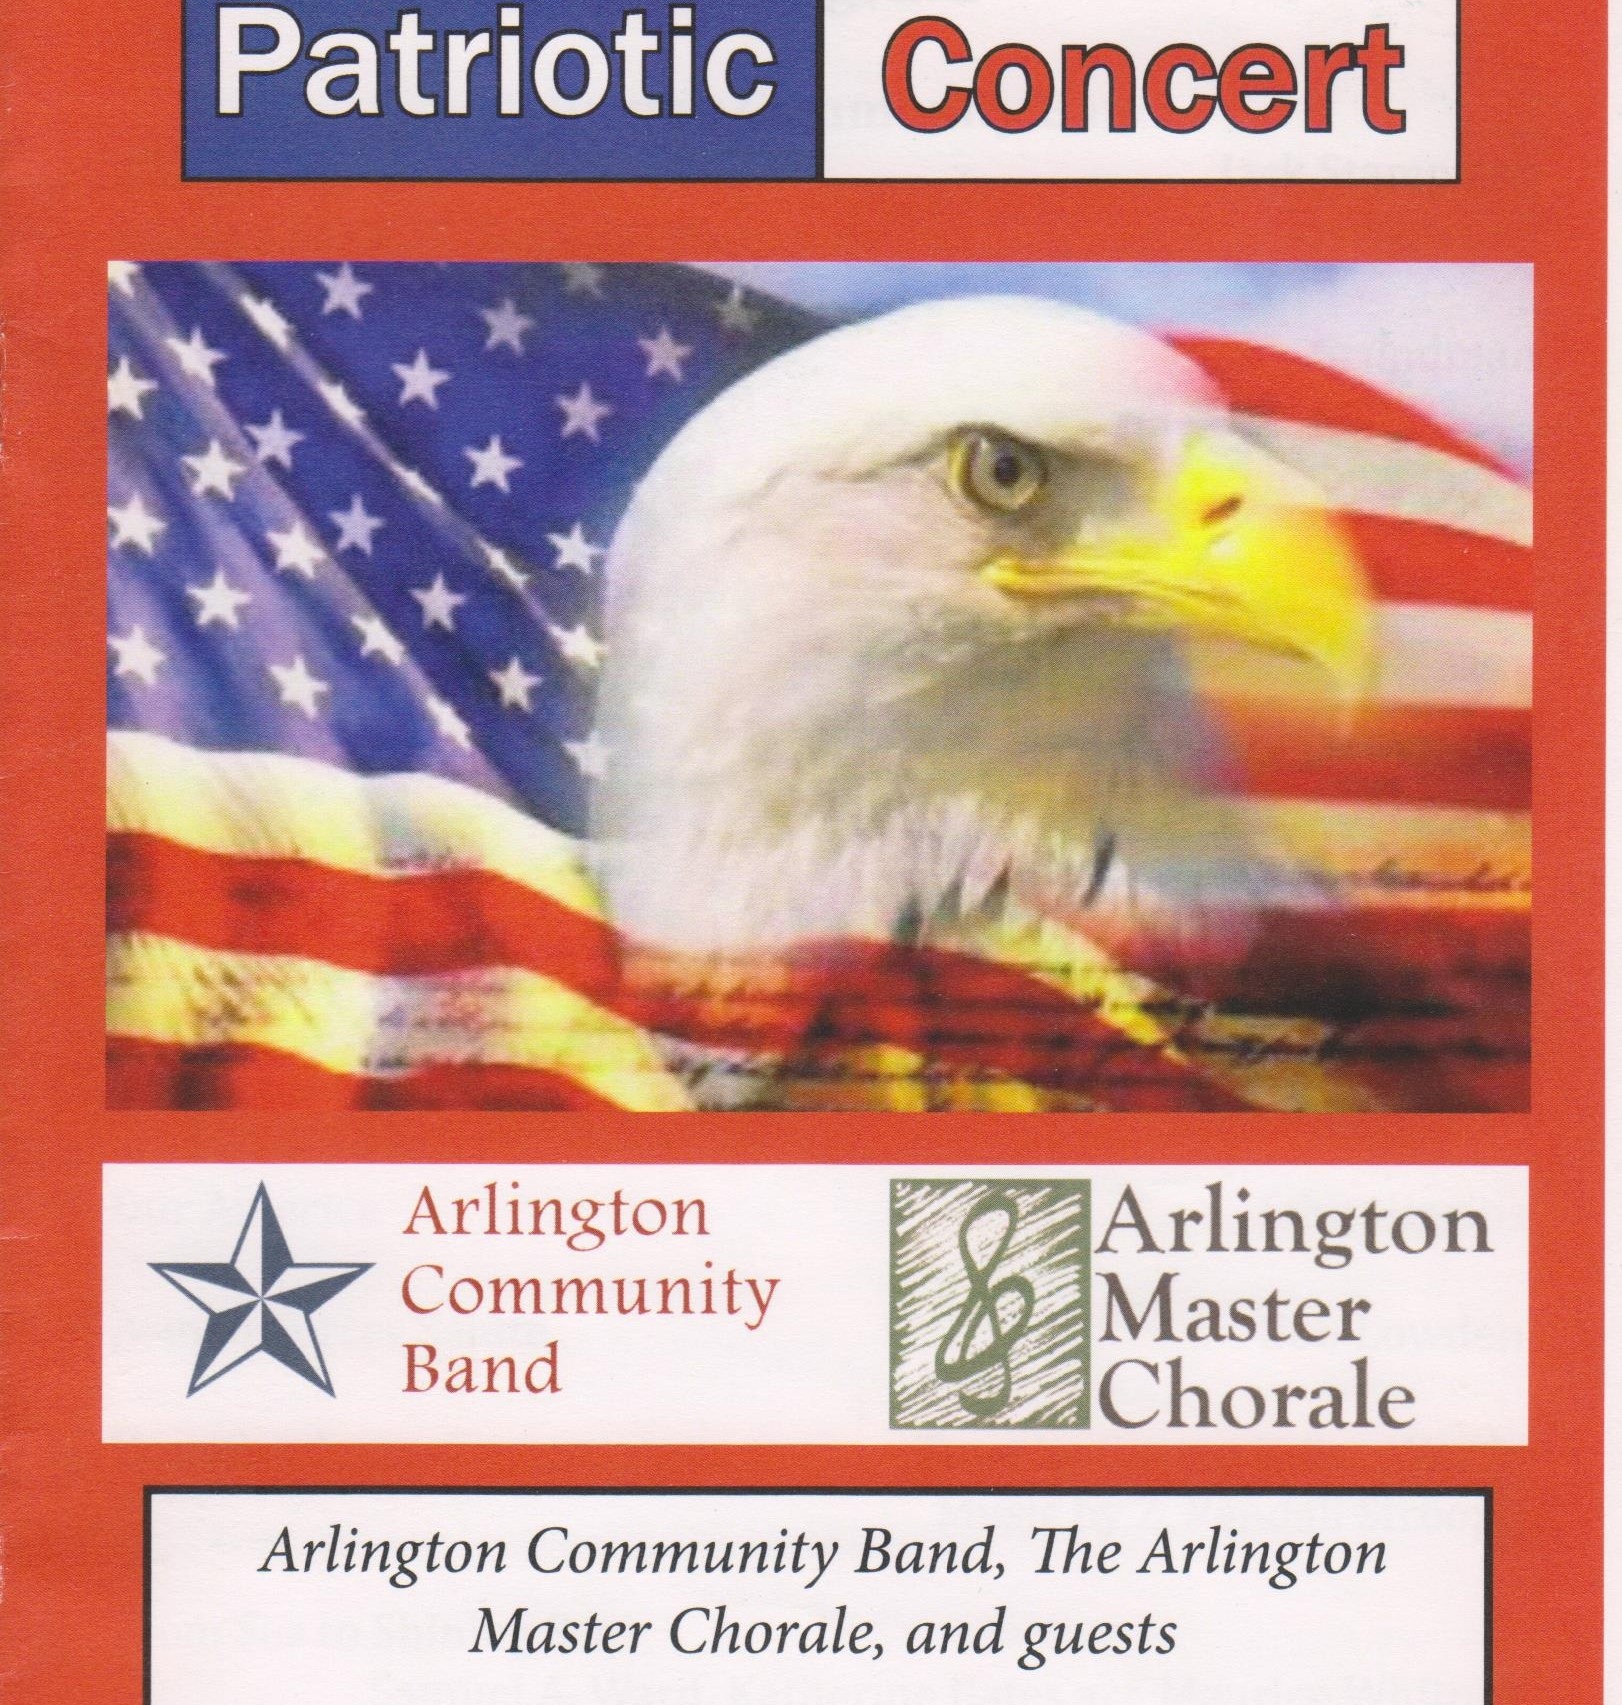  A free concert for all featuring the Arlington Community Band and guests of the Arlington Master Chorale.  Such favorites as Yankee Doodle, God Bless America, and Battle Hymn of the Republic. 